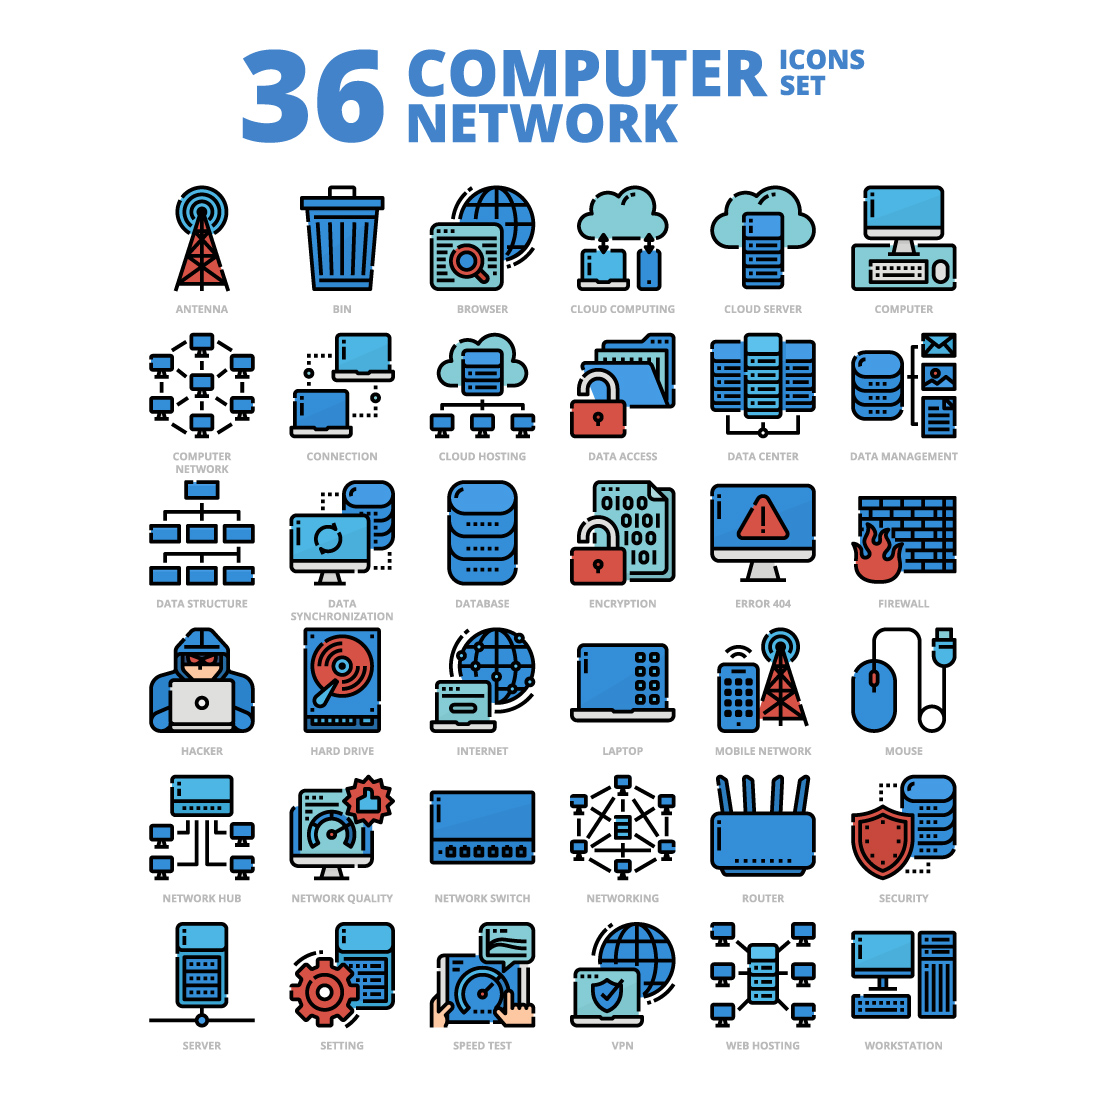 36 Computer Network Icons Set x 4 Styles cover image.